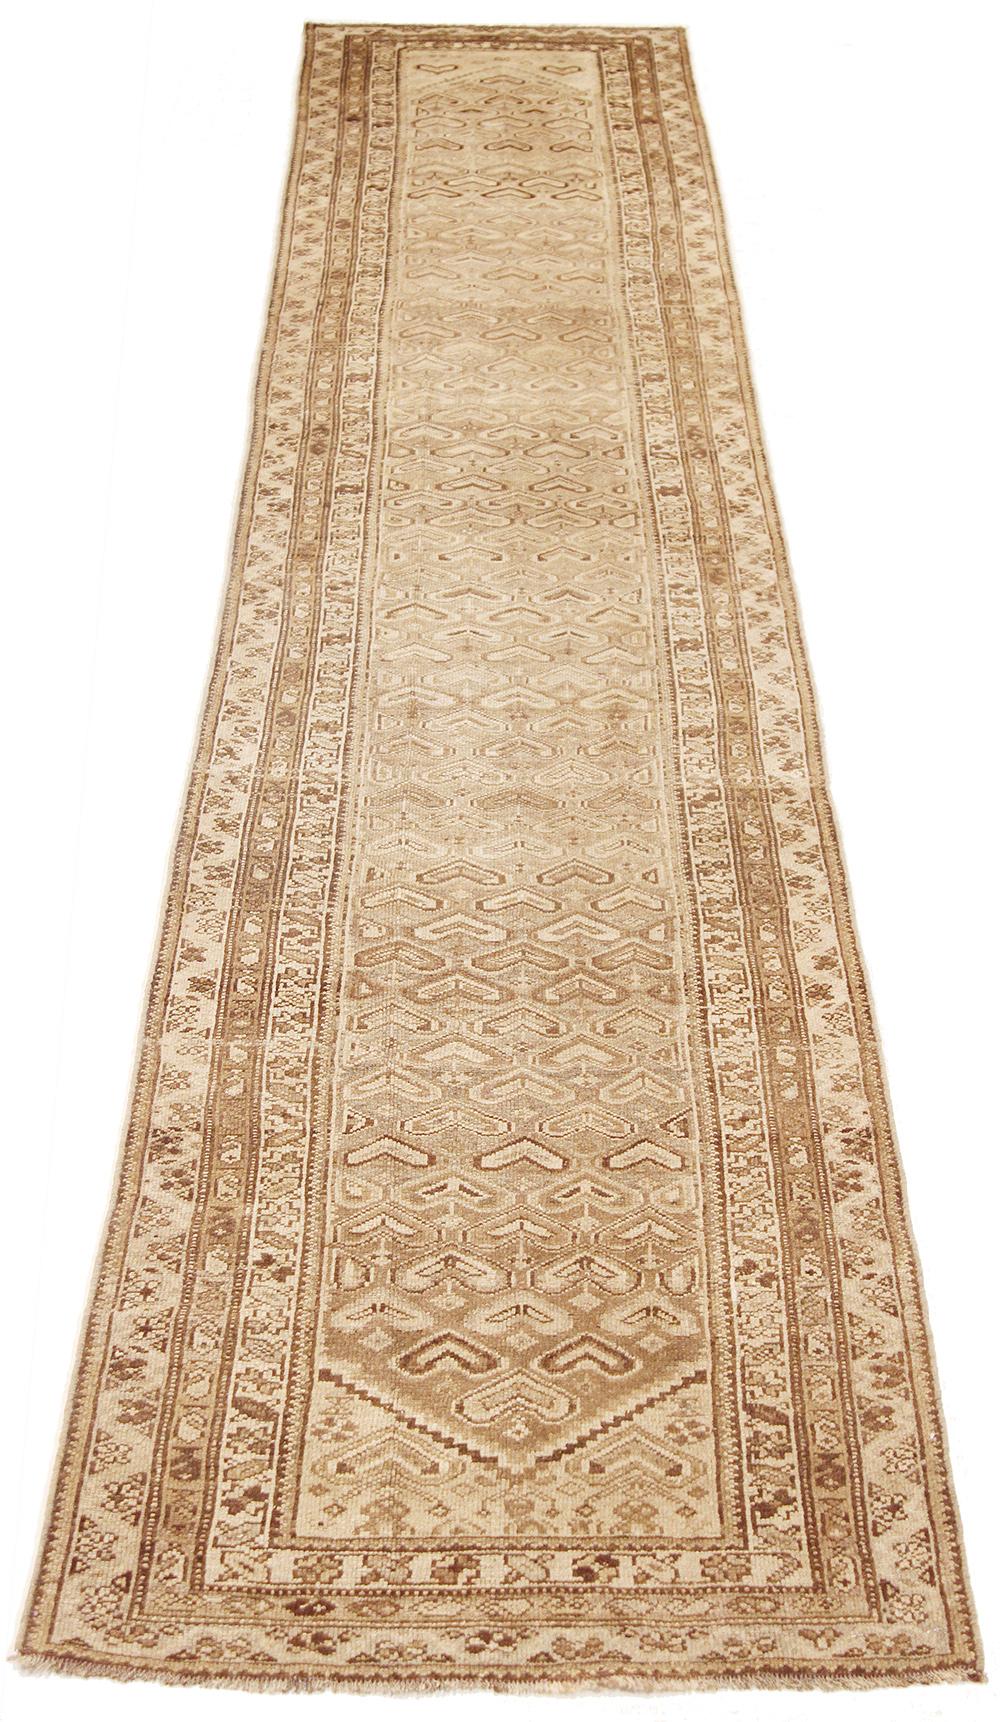 Antique Persian runner rug handwoven from the finest sheep’s wool and colored with all-natural vegetable dyes that are safe for humans and pets. It’s a traditional Koliai design featuring heart-shaped details in ivory and brown over a beige field.